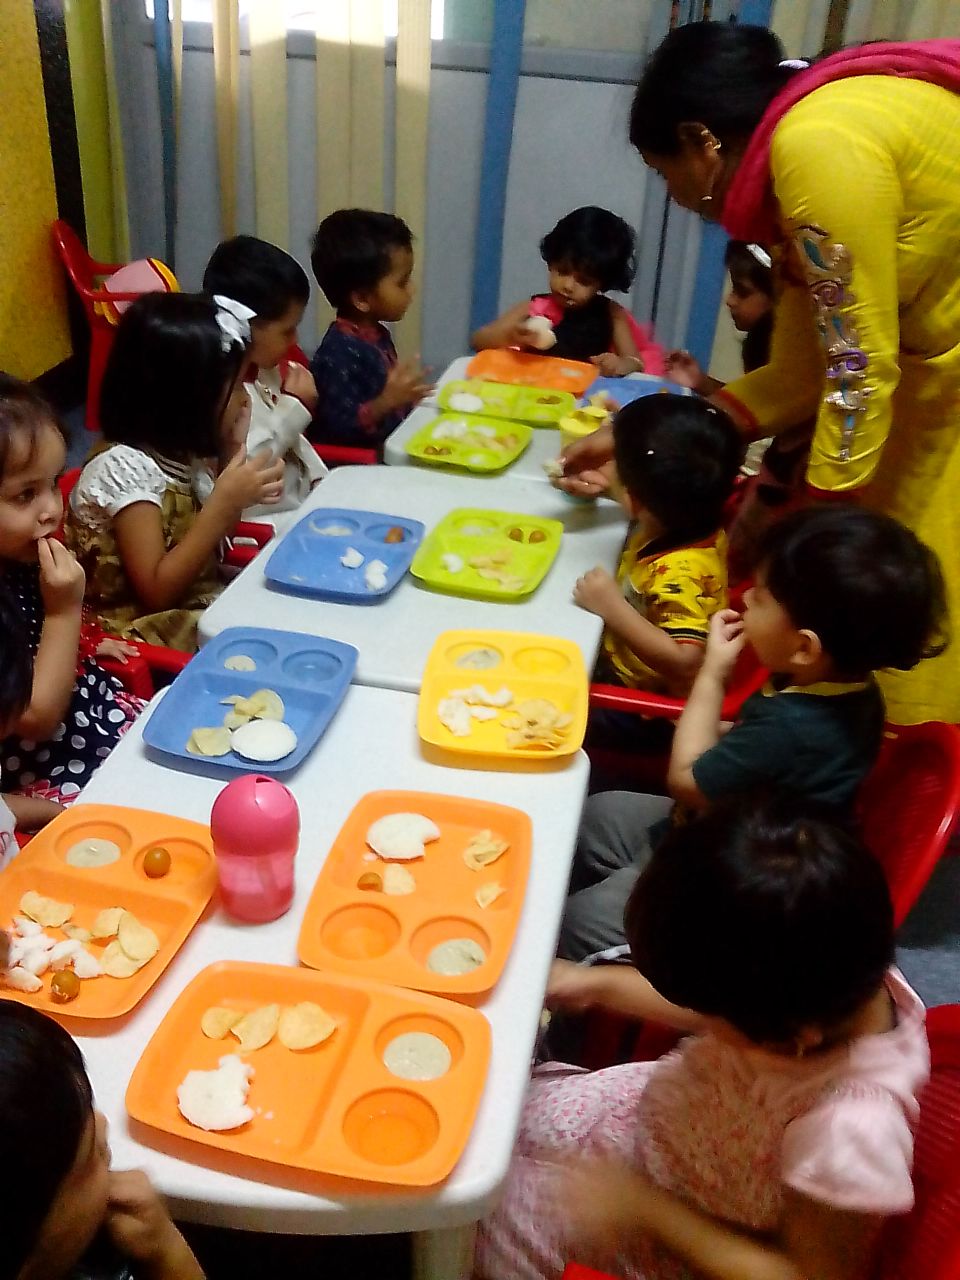  DAY CARE AND PRESCHOOL | STEP UP KIDS DAY CARE & PRESCHOOL | PRESCHOOL BALEWADI, PRESCHOOL IN BALEWADI PHATA, BEST PRESCHOOL BALEWADI, PRESCHOOL IN BALEWADI, DAYCARE BALEWADI, DAYCARE IN BALEWADI, DAYCARE IN BALEWADI PHATA, DAY CARE IN BALEWADI, BEST, TOP. - GL20572